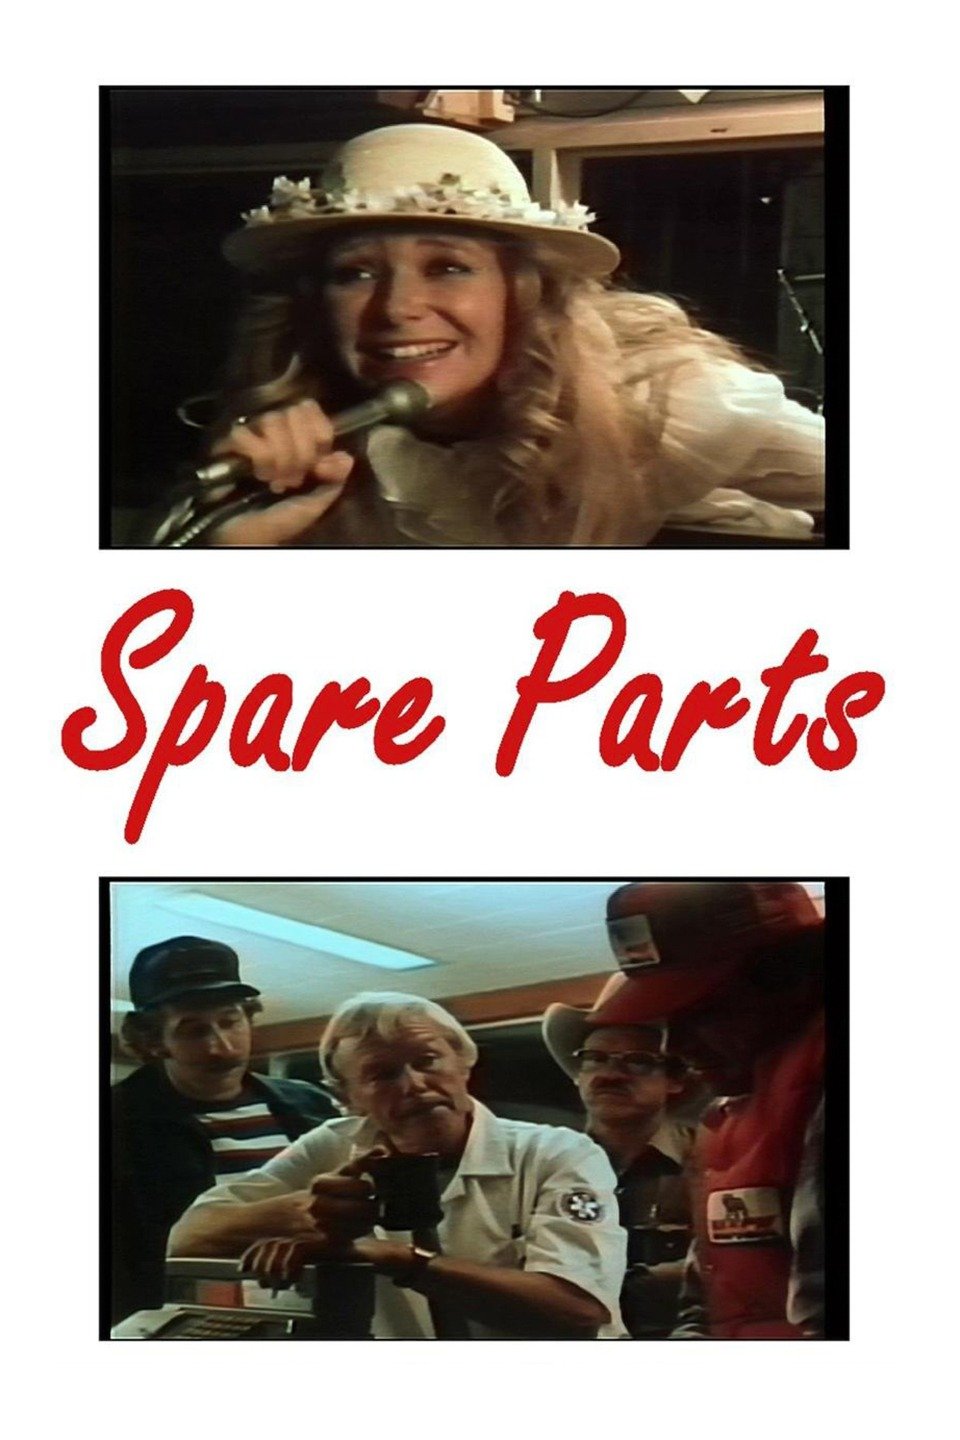 spare parts movie poster